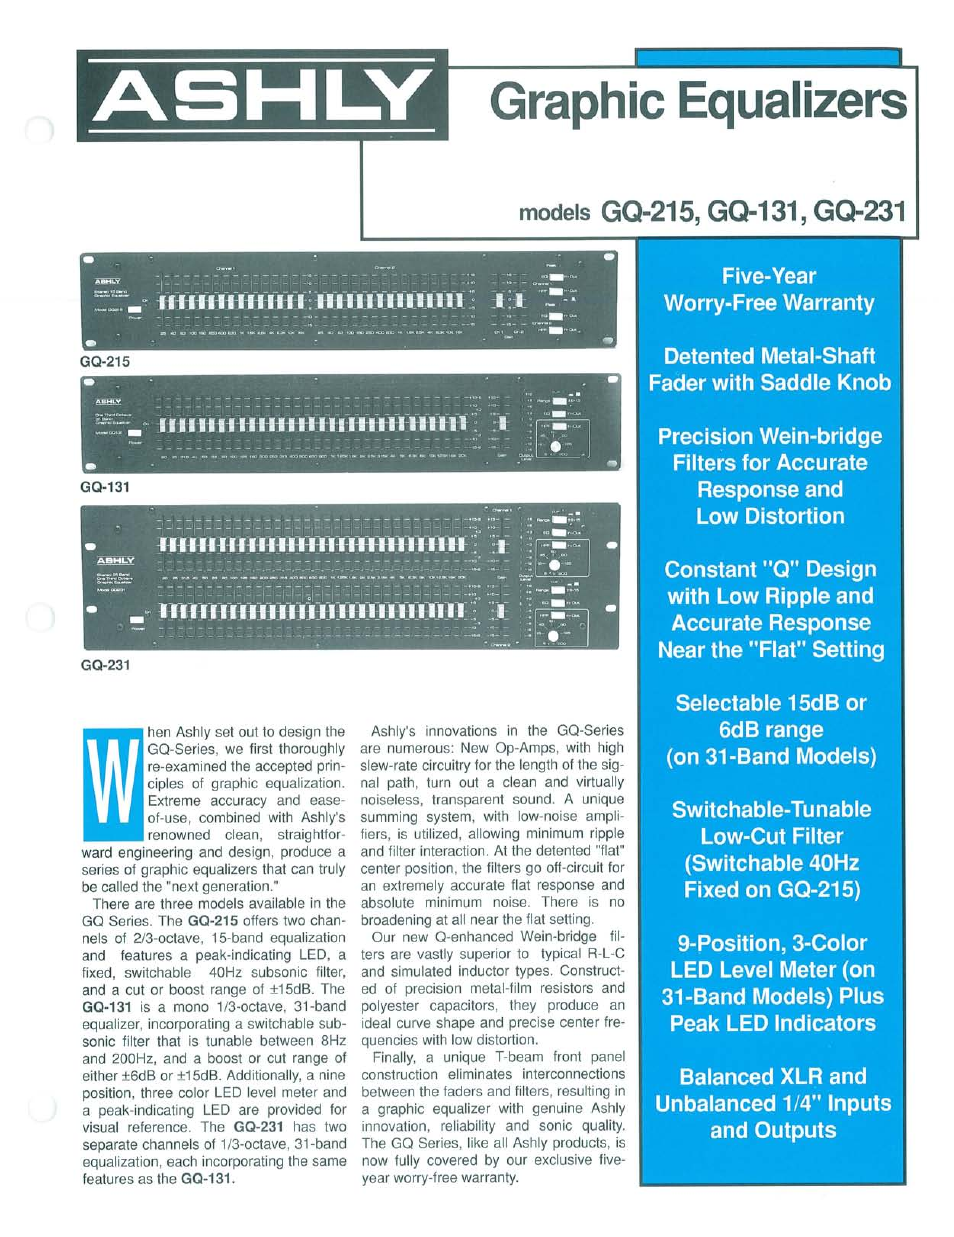 Graphic Equalizers GQ-215